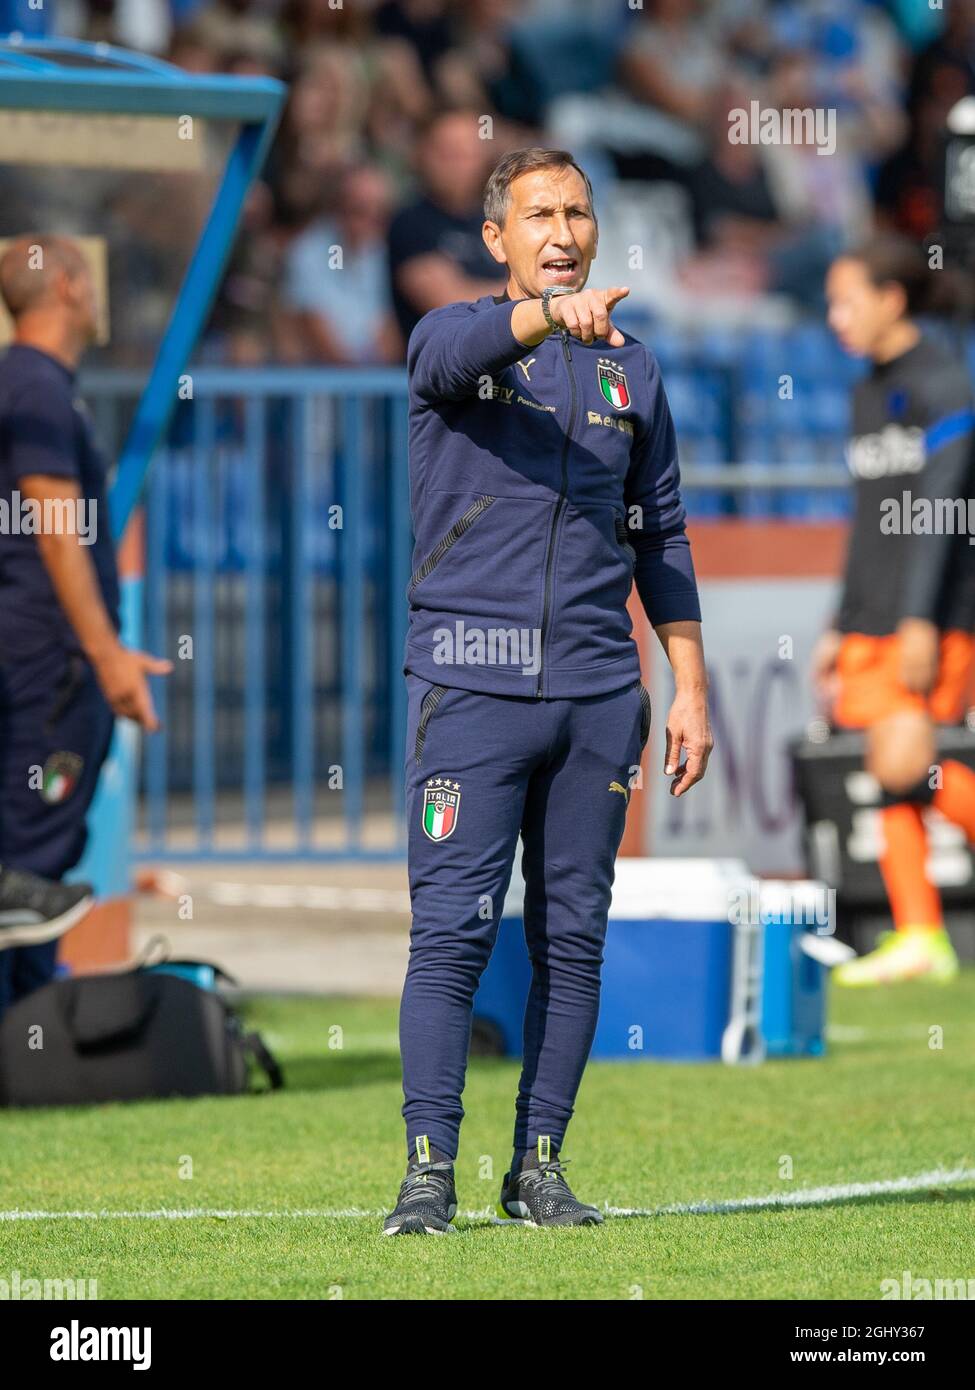 KATWIJK, NETHERLANDS - SEPTEMBER 6: Carmine Nunziata National Coach of Italy o19 during the Friendly Match match between Netherlands o19 and Italy o19 at Sportpark Nieuw Zuid on September 6, 2021 in Katwijk, Netherlands (Photo by Kees Kuijt/Orange Pictures) Stock Photo